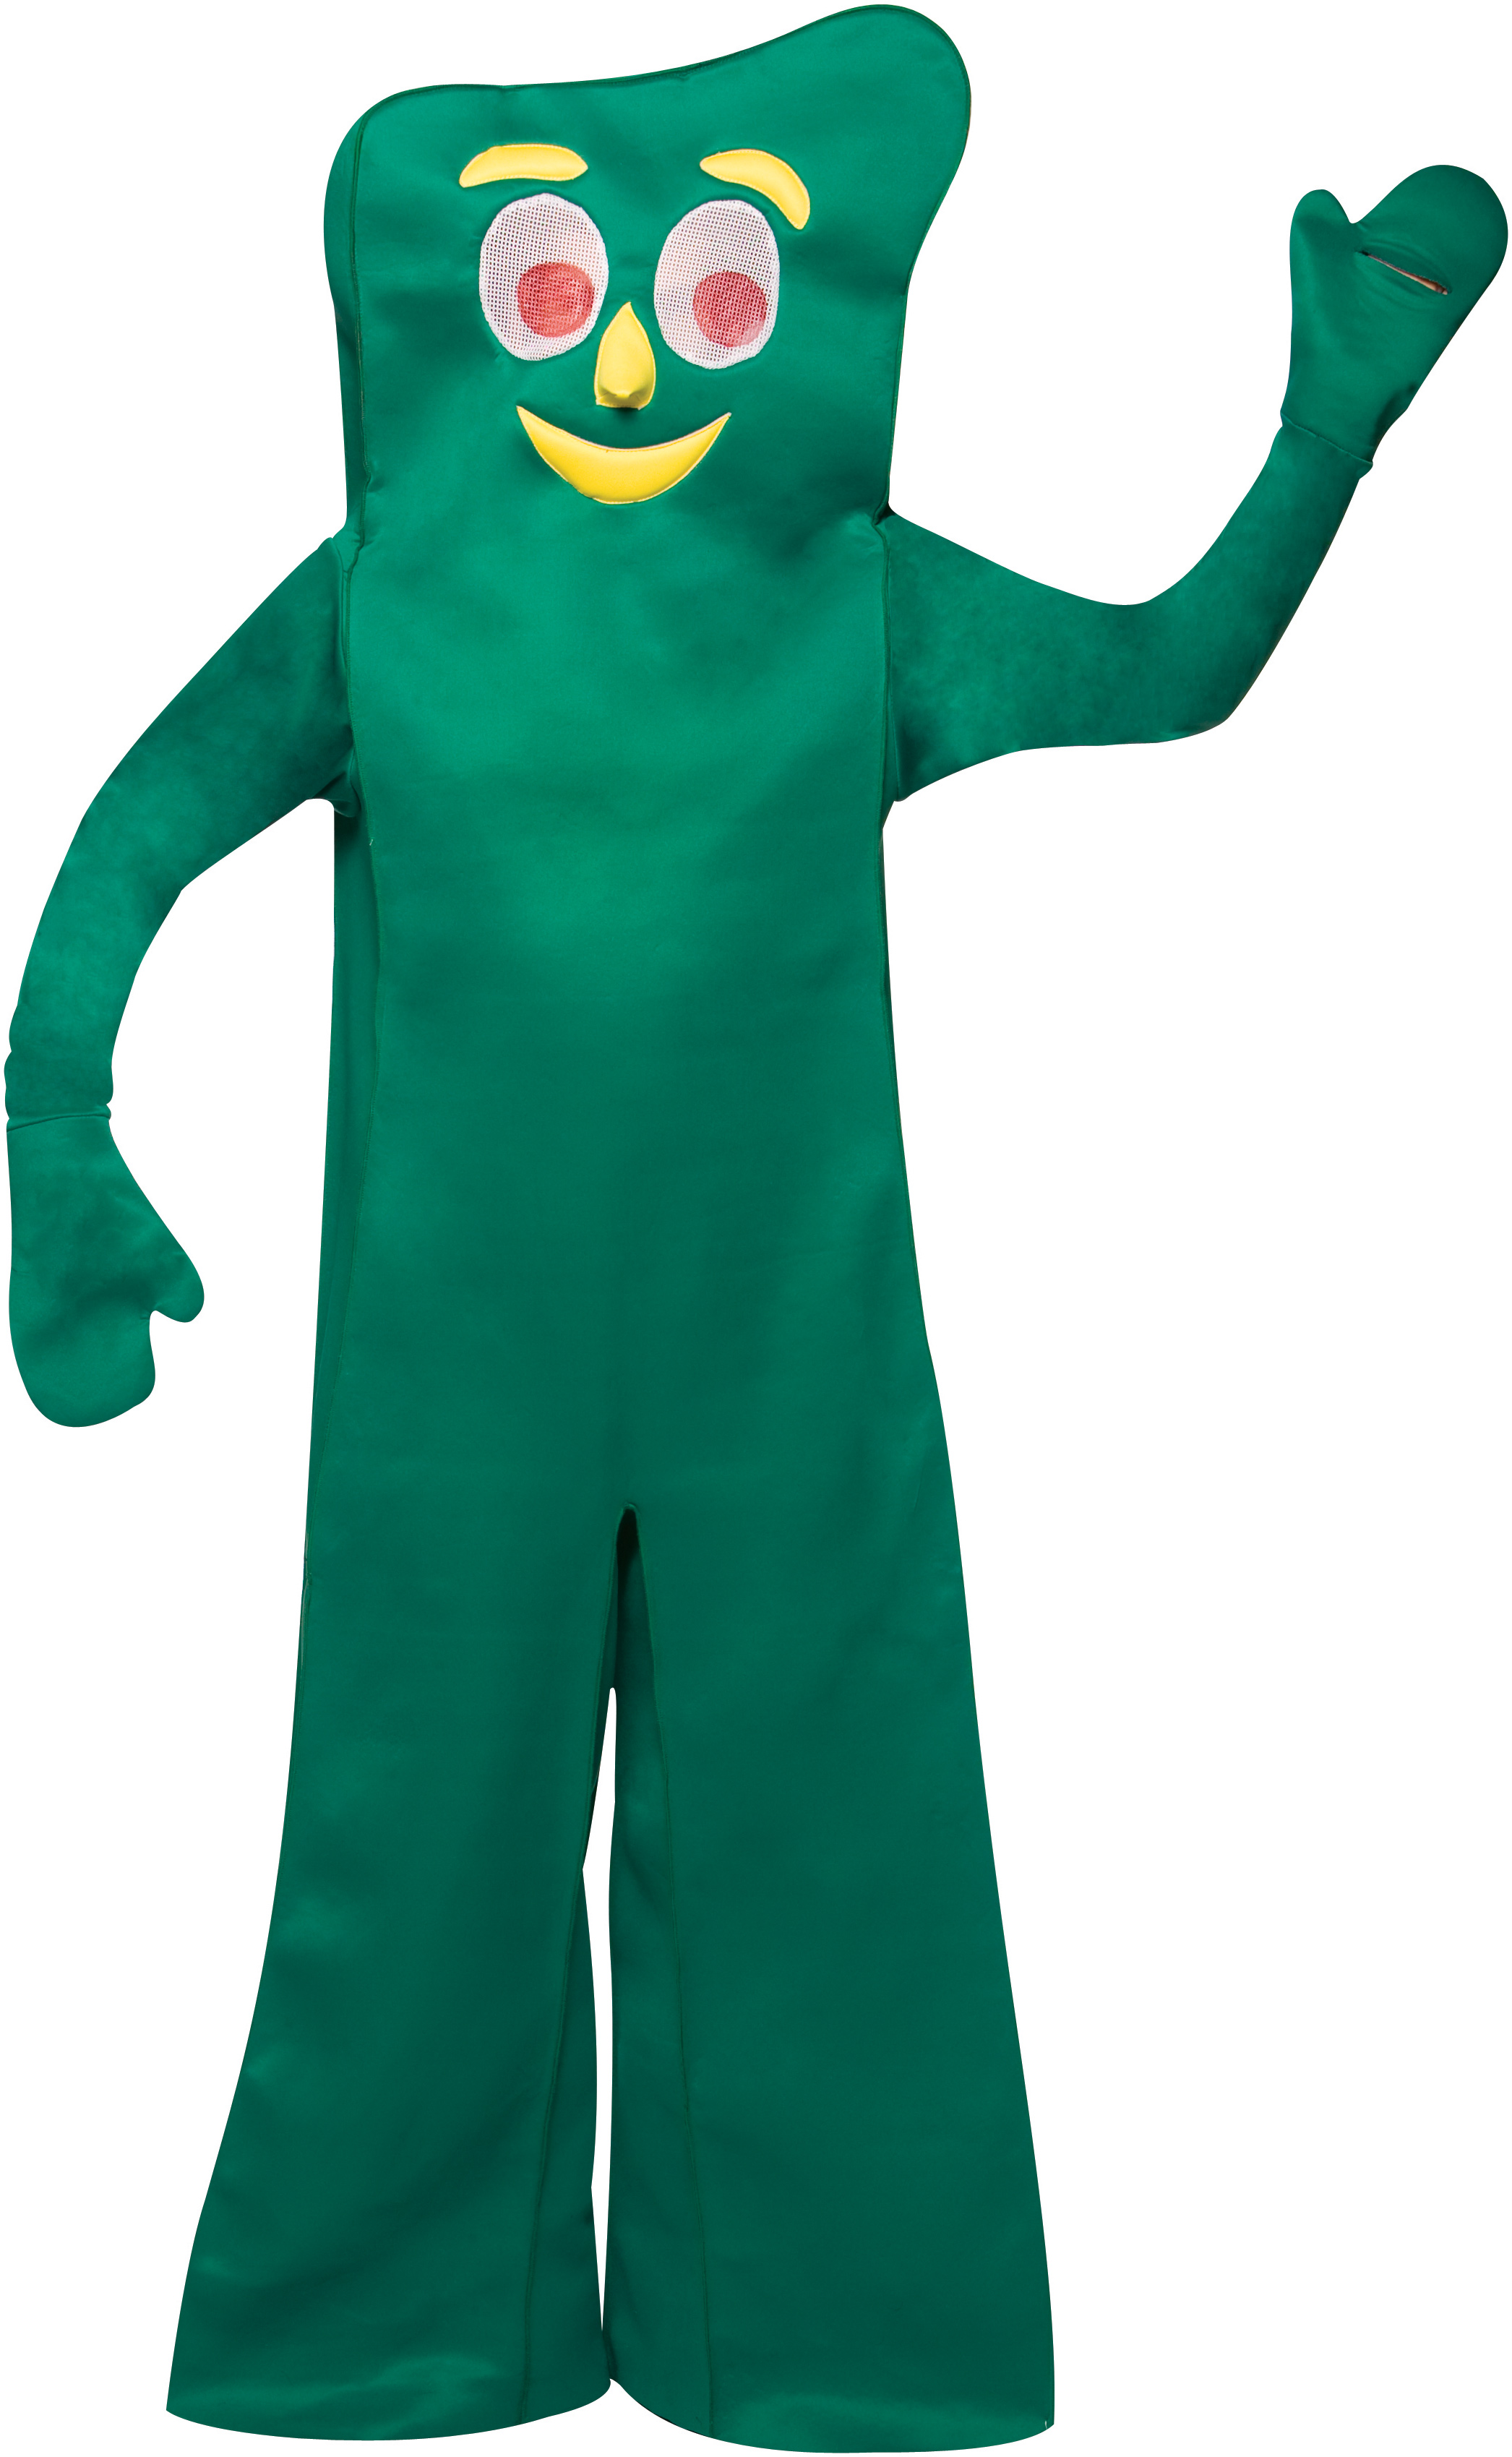 Gumby Adult Costume. 